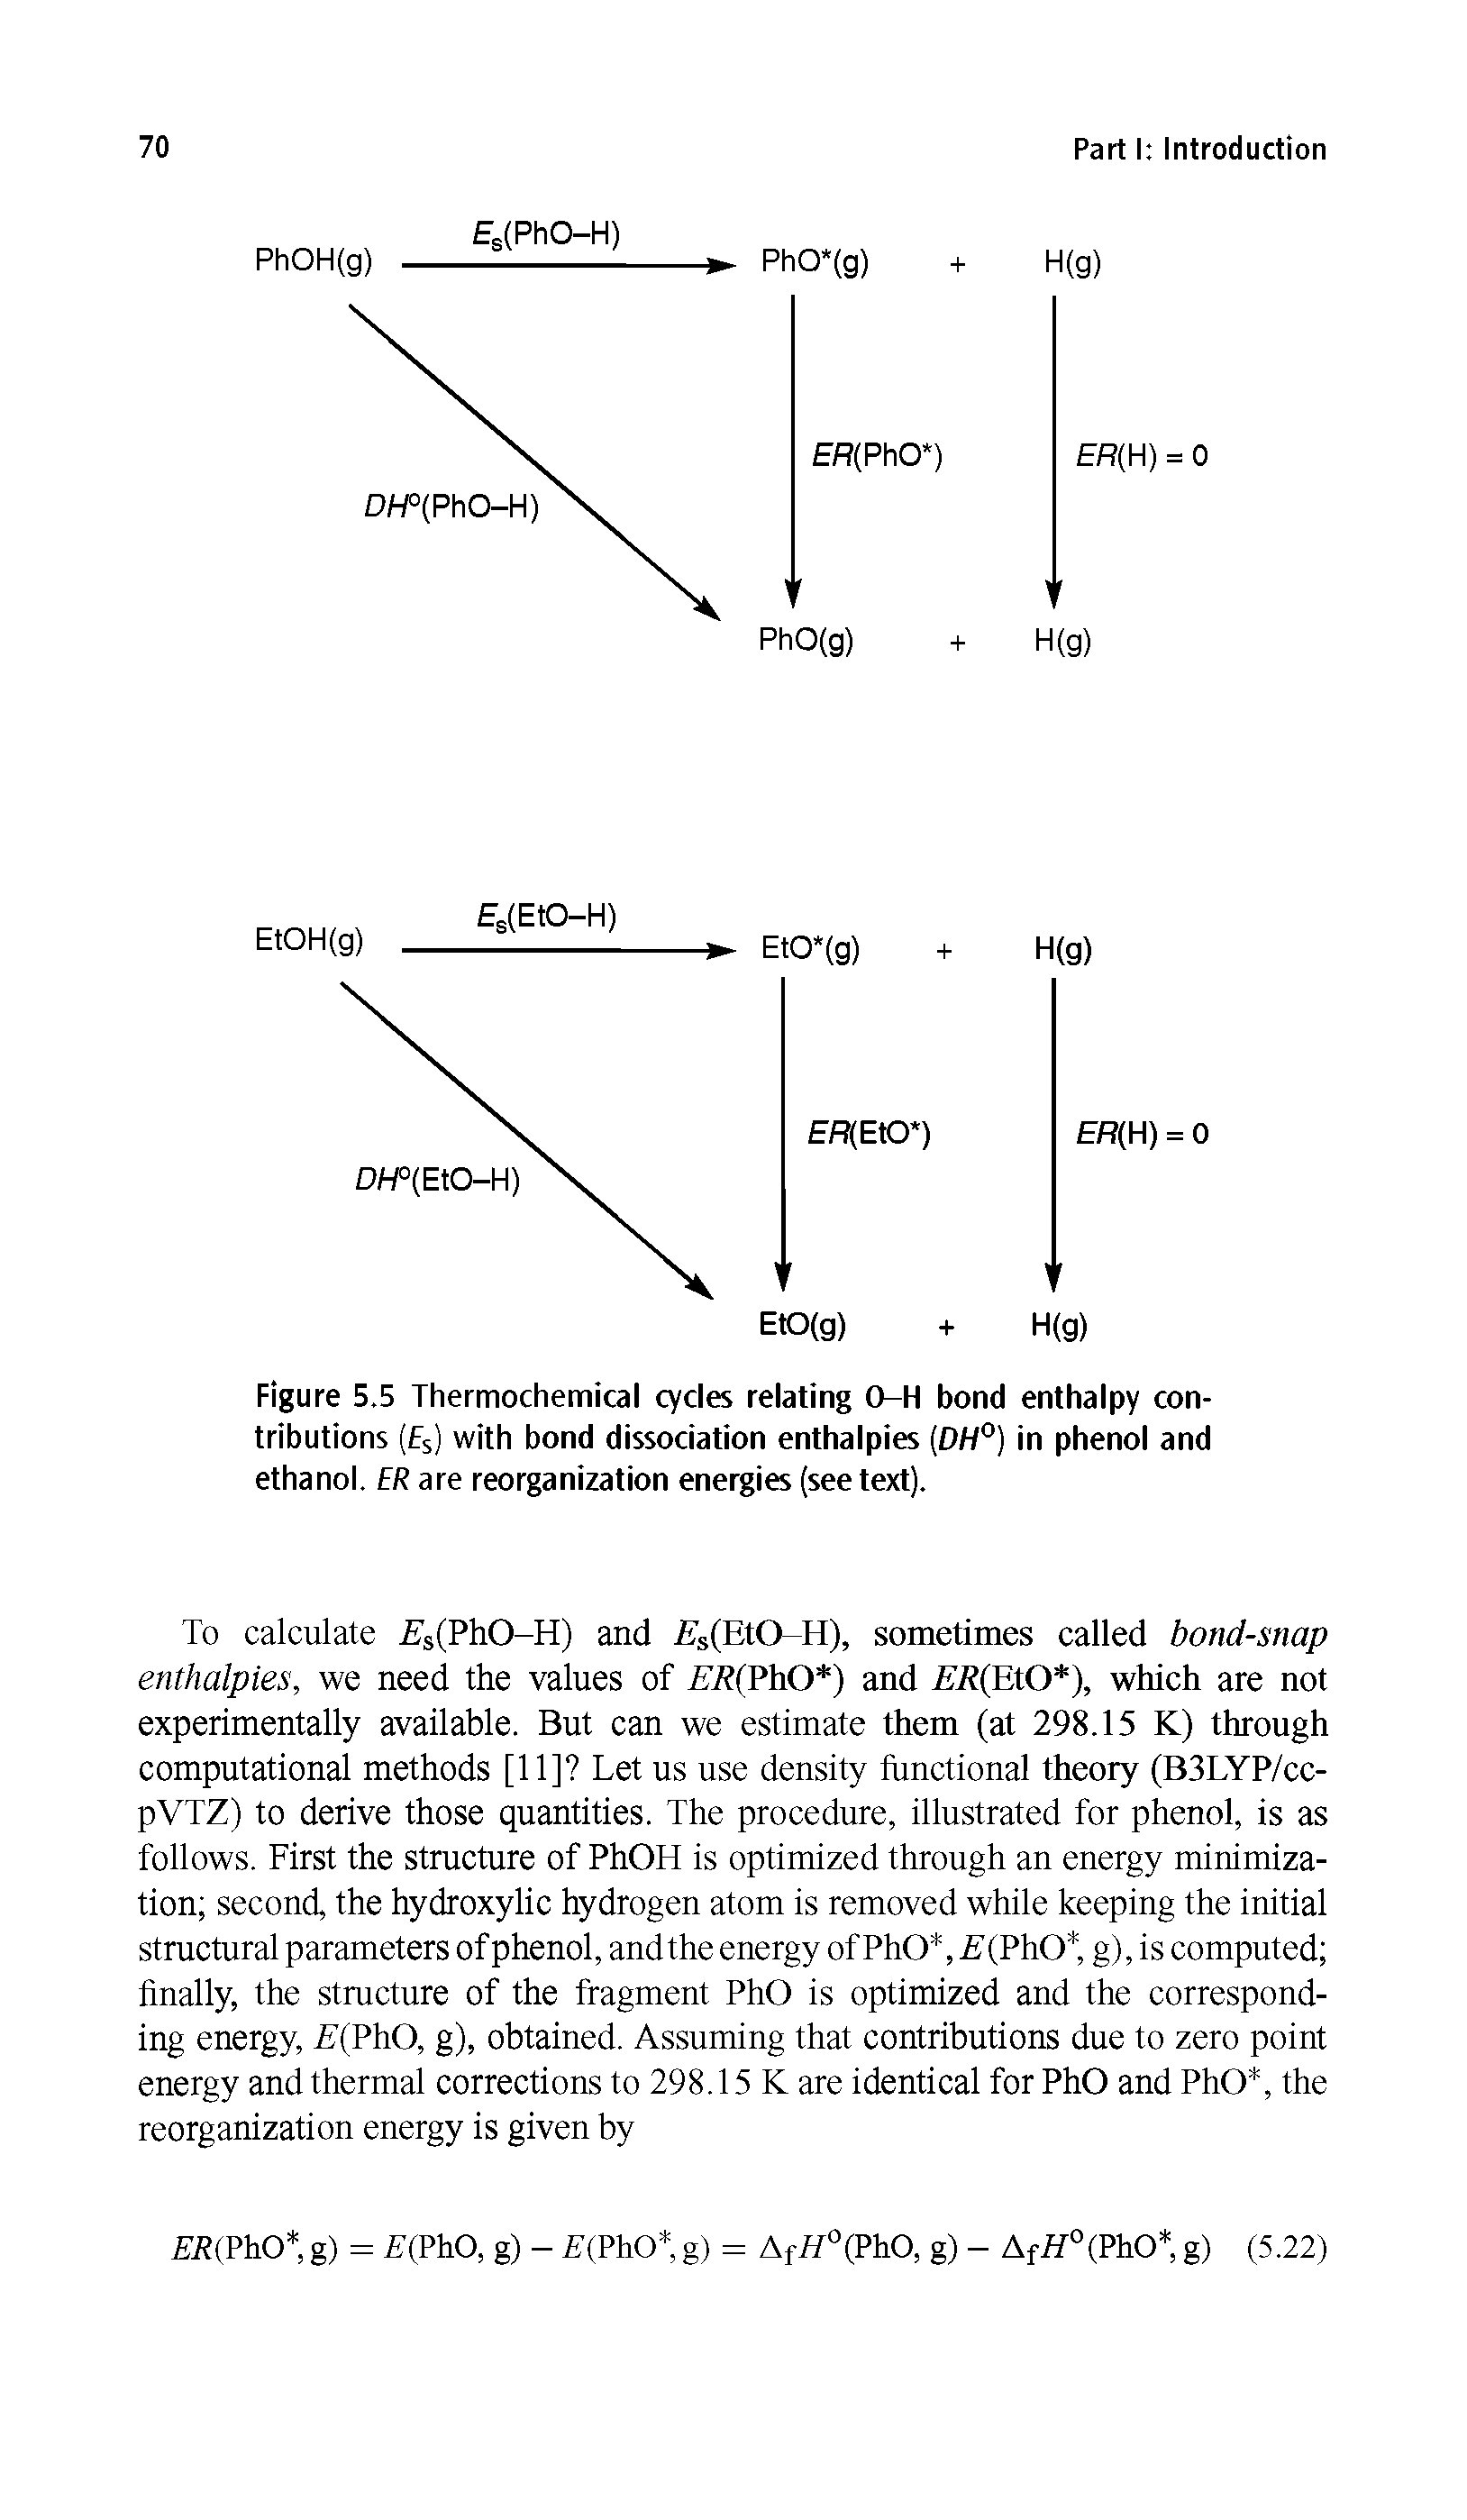 Figure 5.5 Thermochemical cycles relating O-H bond enthalpy contributions ( s) with bond dissociation enthalpies (DH°) in phenol and ethanol. ER are reorganization energies (see text).